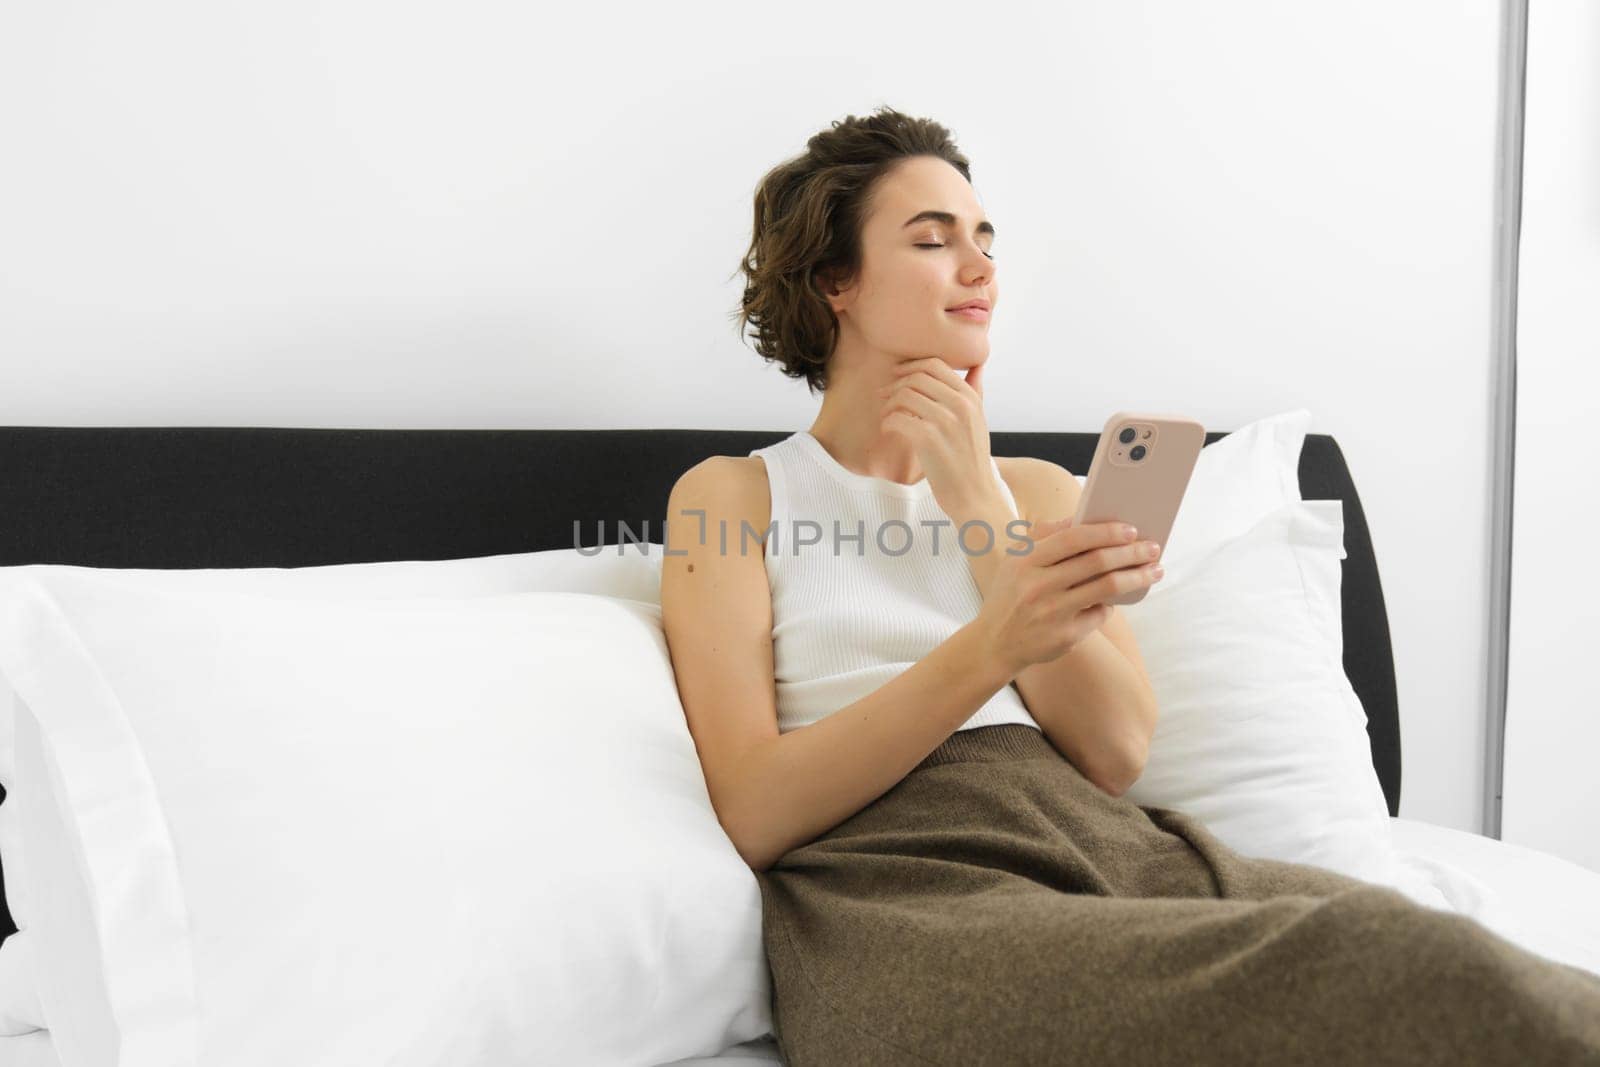 Portrait of young woman with eyes closed and pleased smile, holding smartphone, lying and resting in bed, using mobile phone.